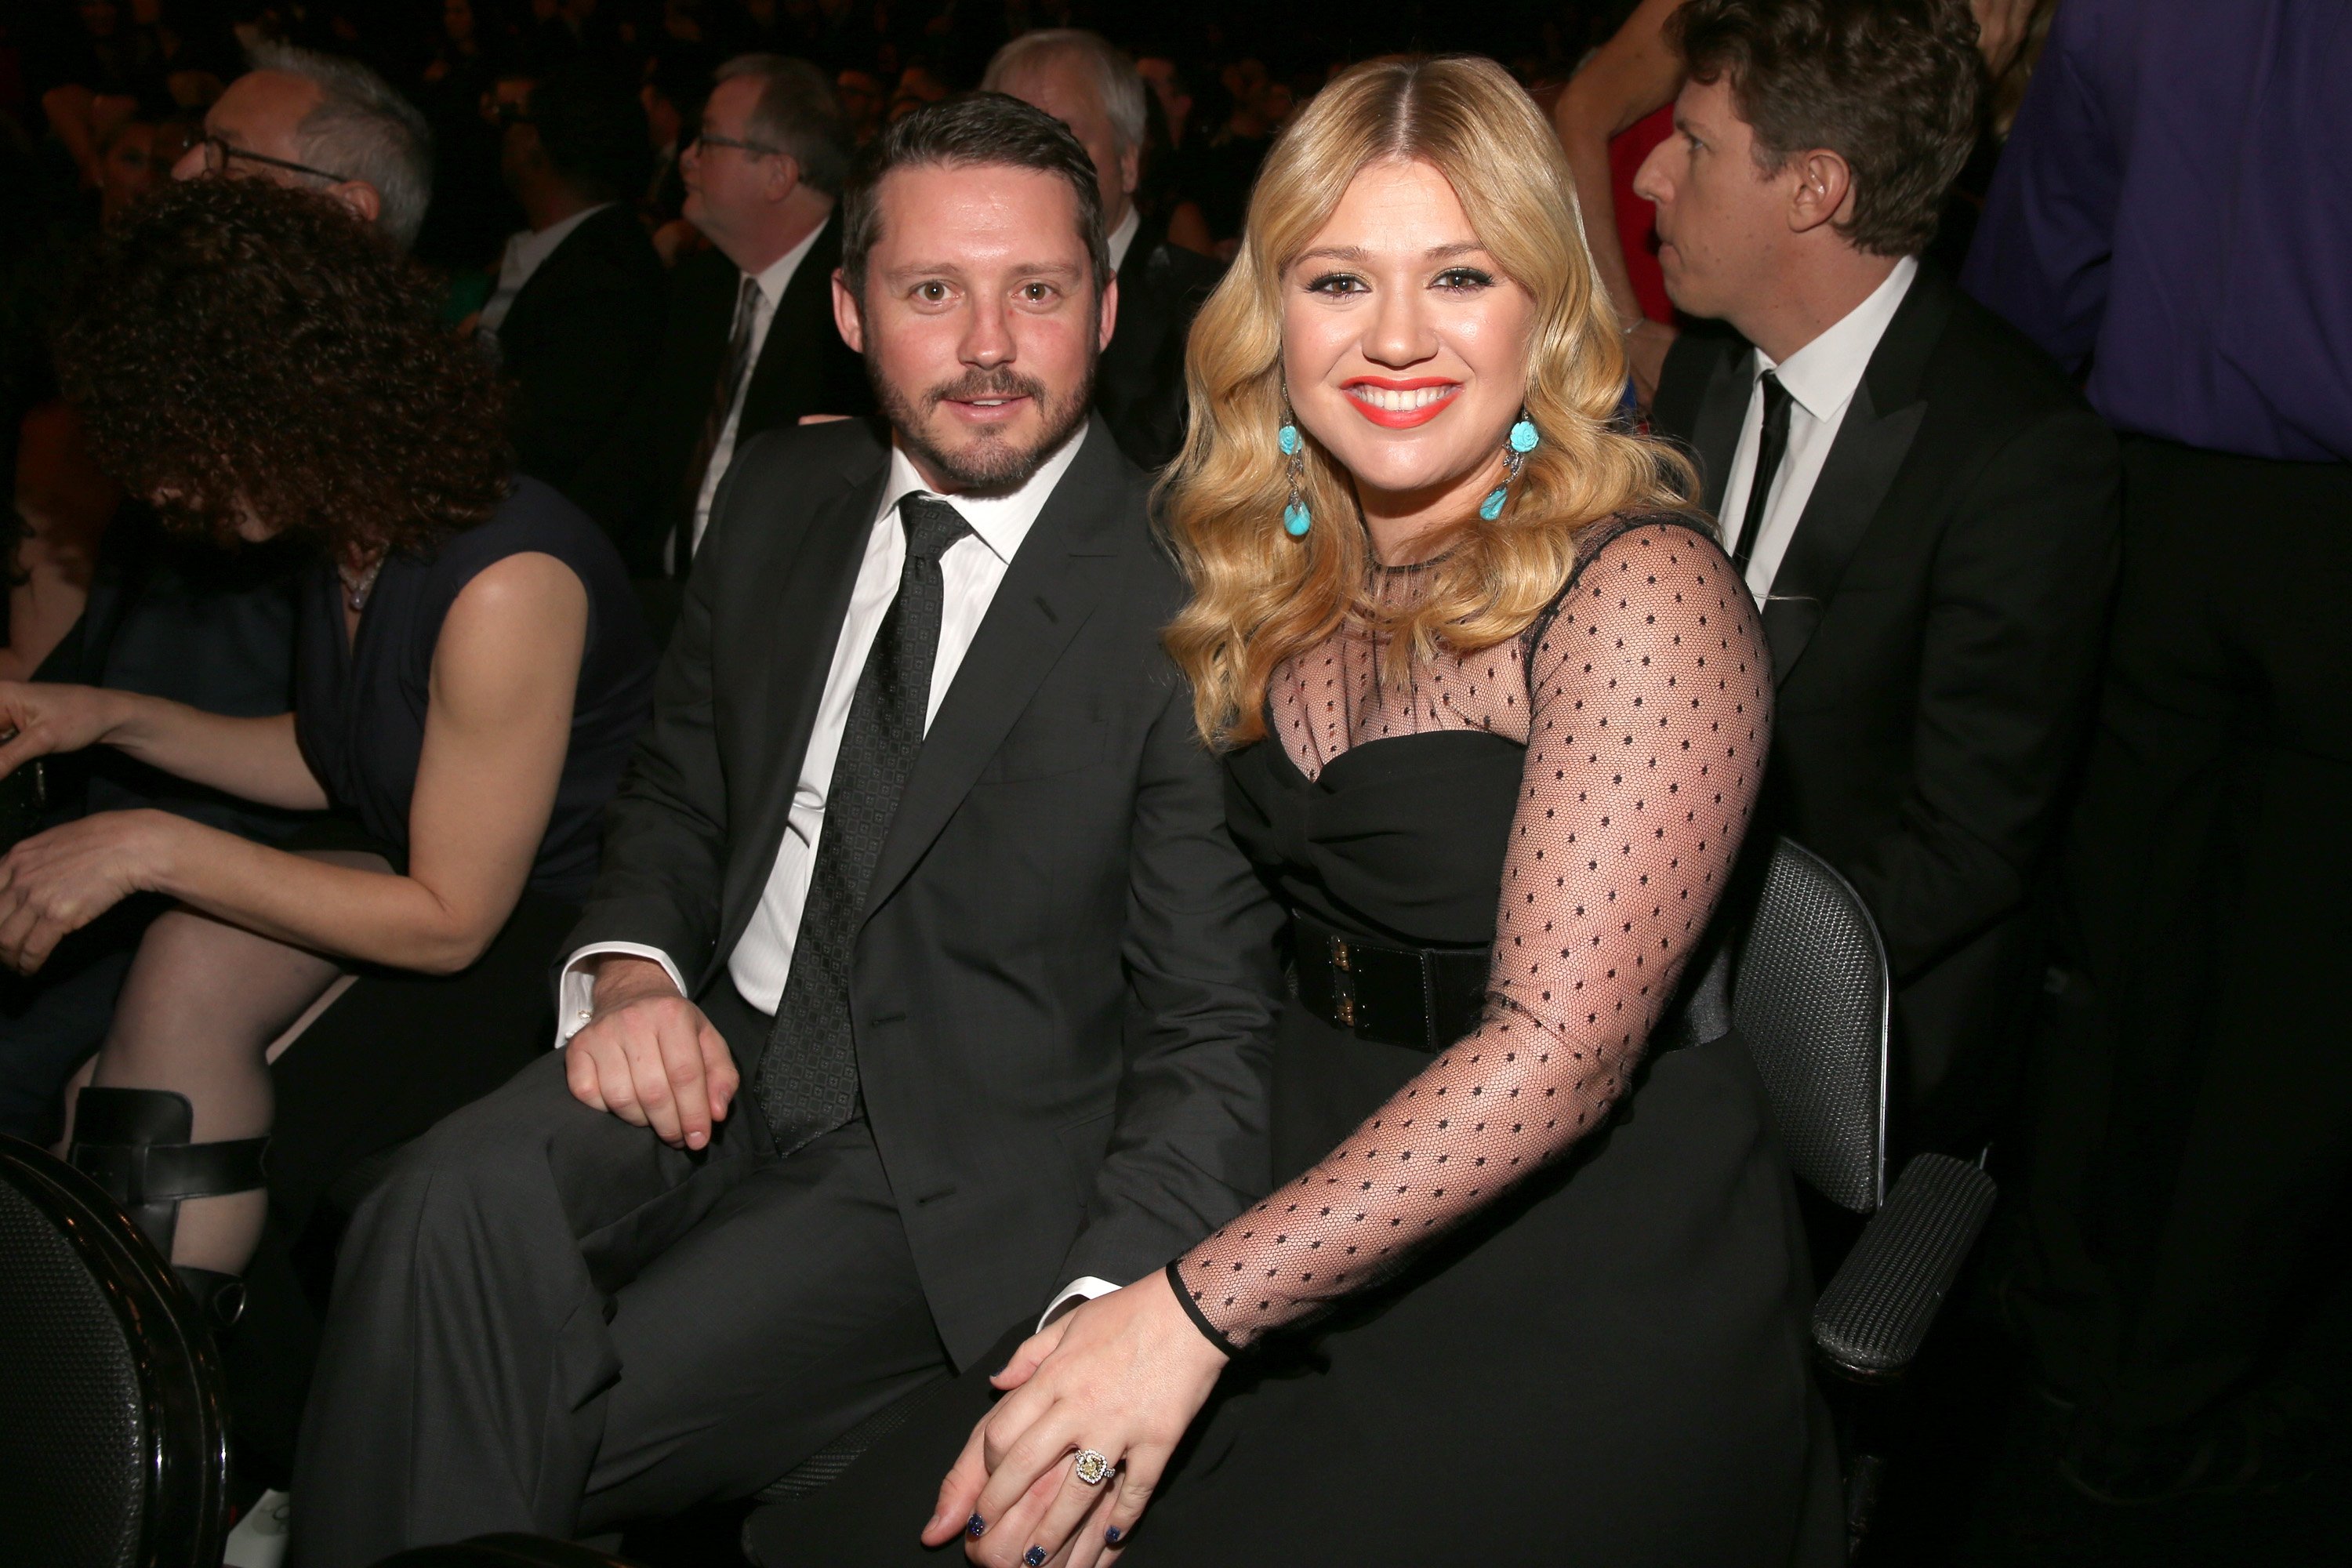 Kelly Clarkson and Brandon Blackstock attend the 55th Grammy Awards at Staples Center on February 10, 2013 in Los Angeles, California. | Photo: Getty Images